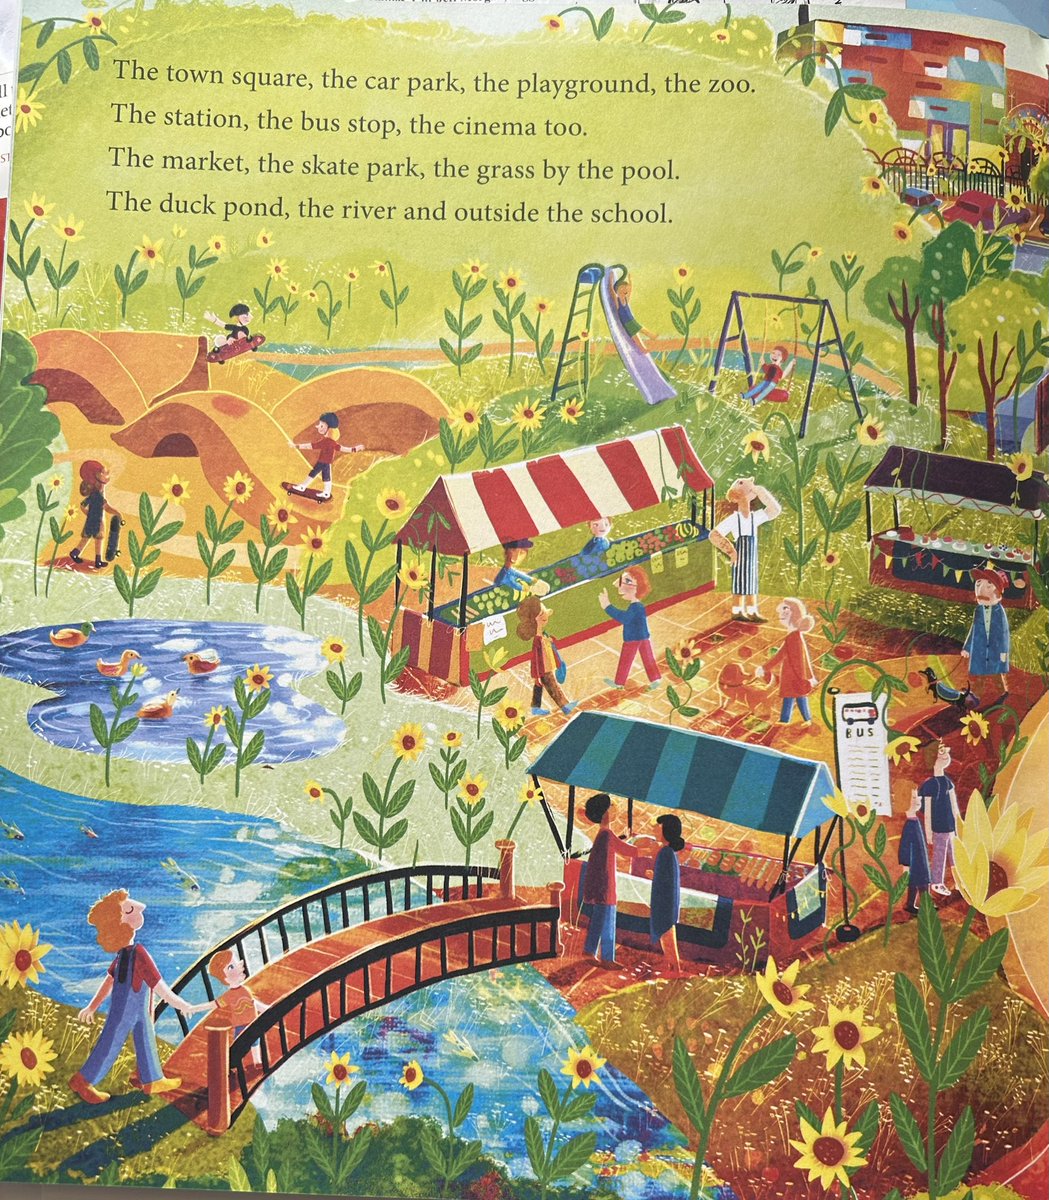 #NewIllustrationoftheDay. Teeming half-spread of town scattered with sunflowers & other happy things eg daisies, swings, ducks, bunting. By David Litchfield from A Sprinkle of Happiness with @lucymayrowland now in pb about spreading sunflowers & love @scholasticuk @dc_litchfield